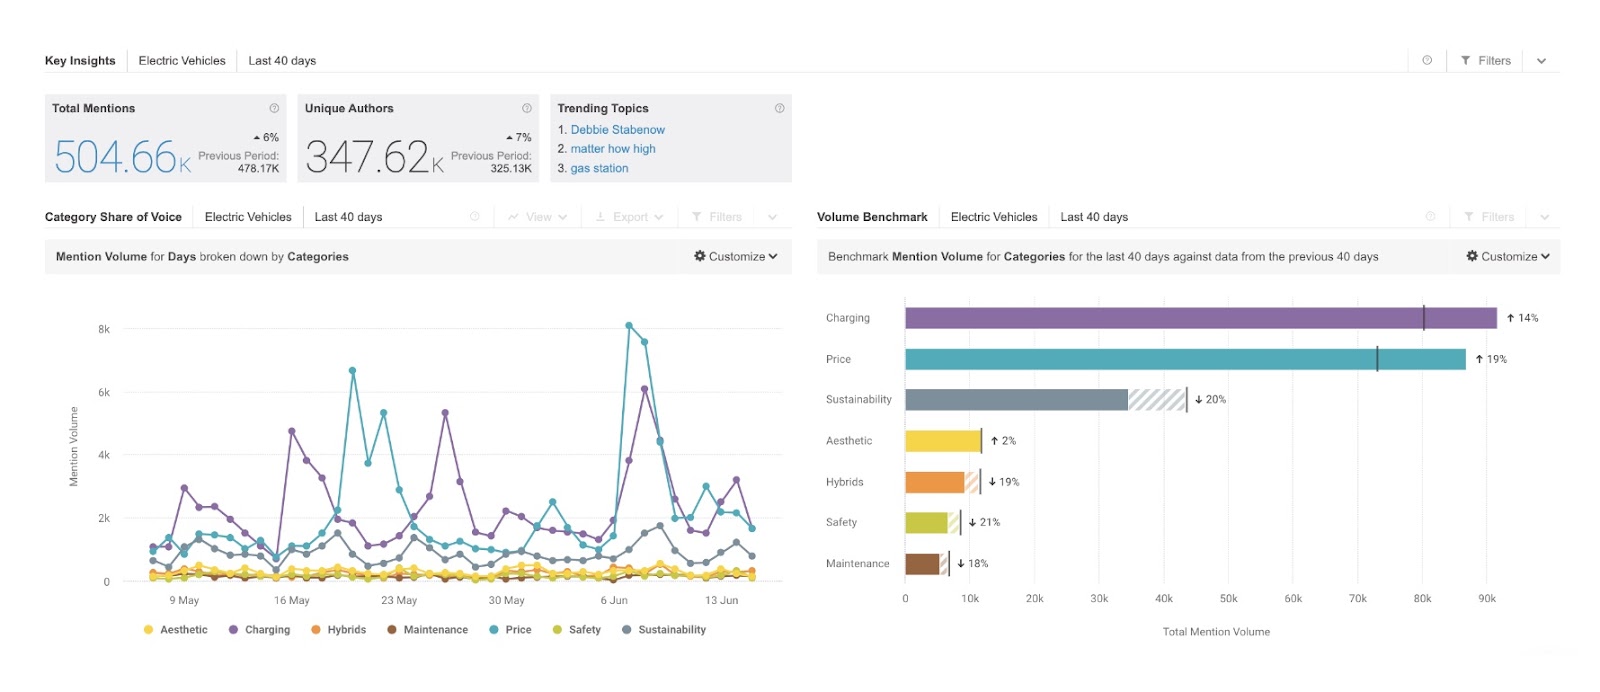 Brandwatch's dashboard showing key insights like total mentions, unique authors, trending topics, and category share of voice.